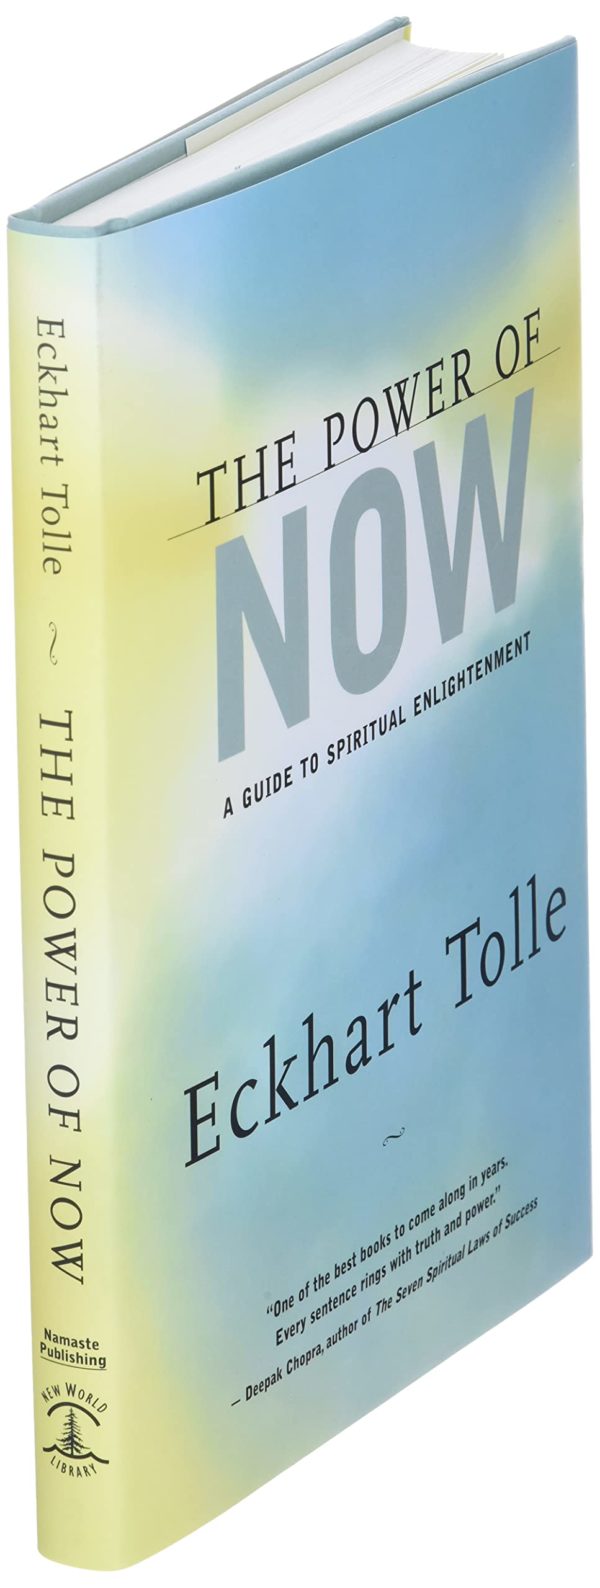 The Power of Now: A Guide to Spiritual Enlightenment by Eckhart Tolle - Hardcover